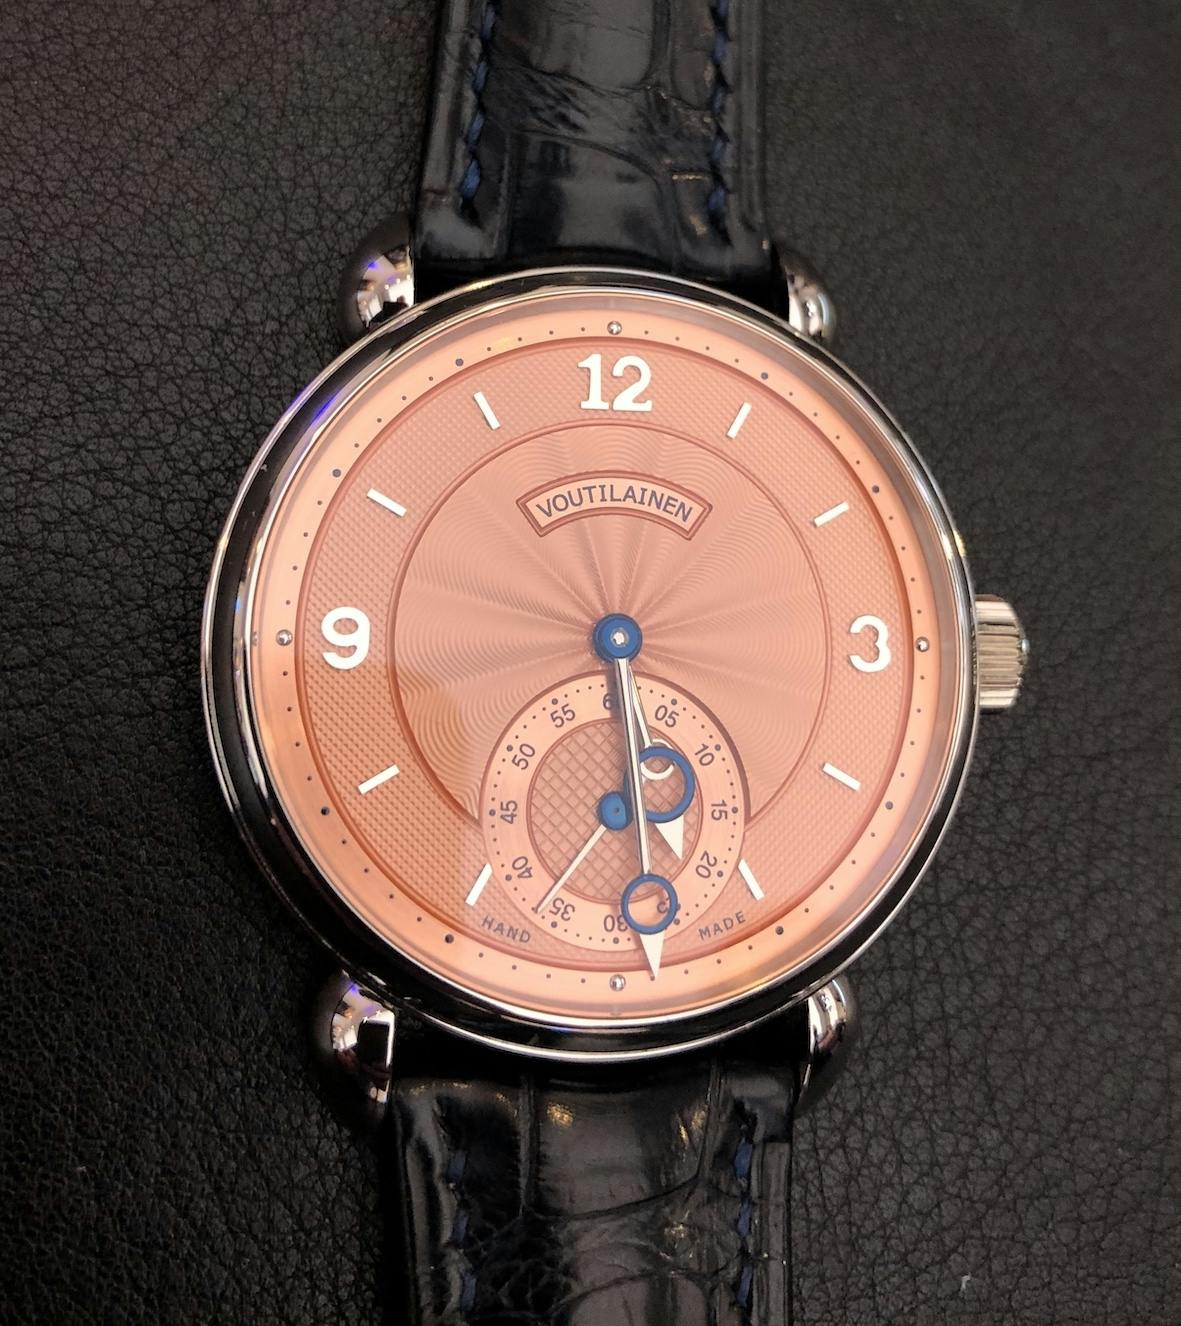 A unique watch with an engraved pink gold dial from Kari Voutilainen.